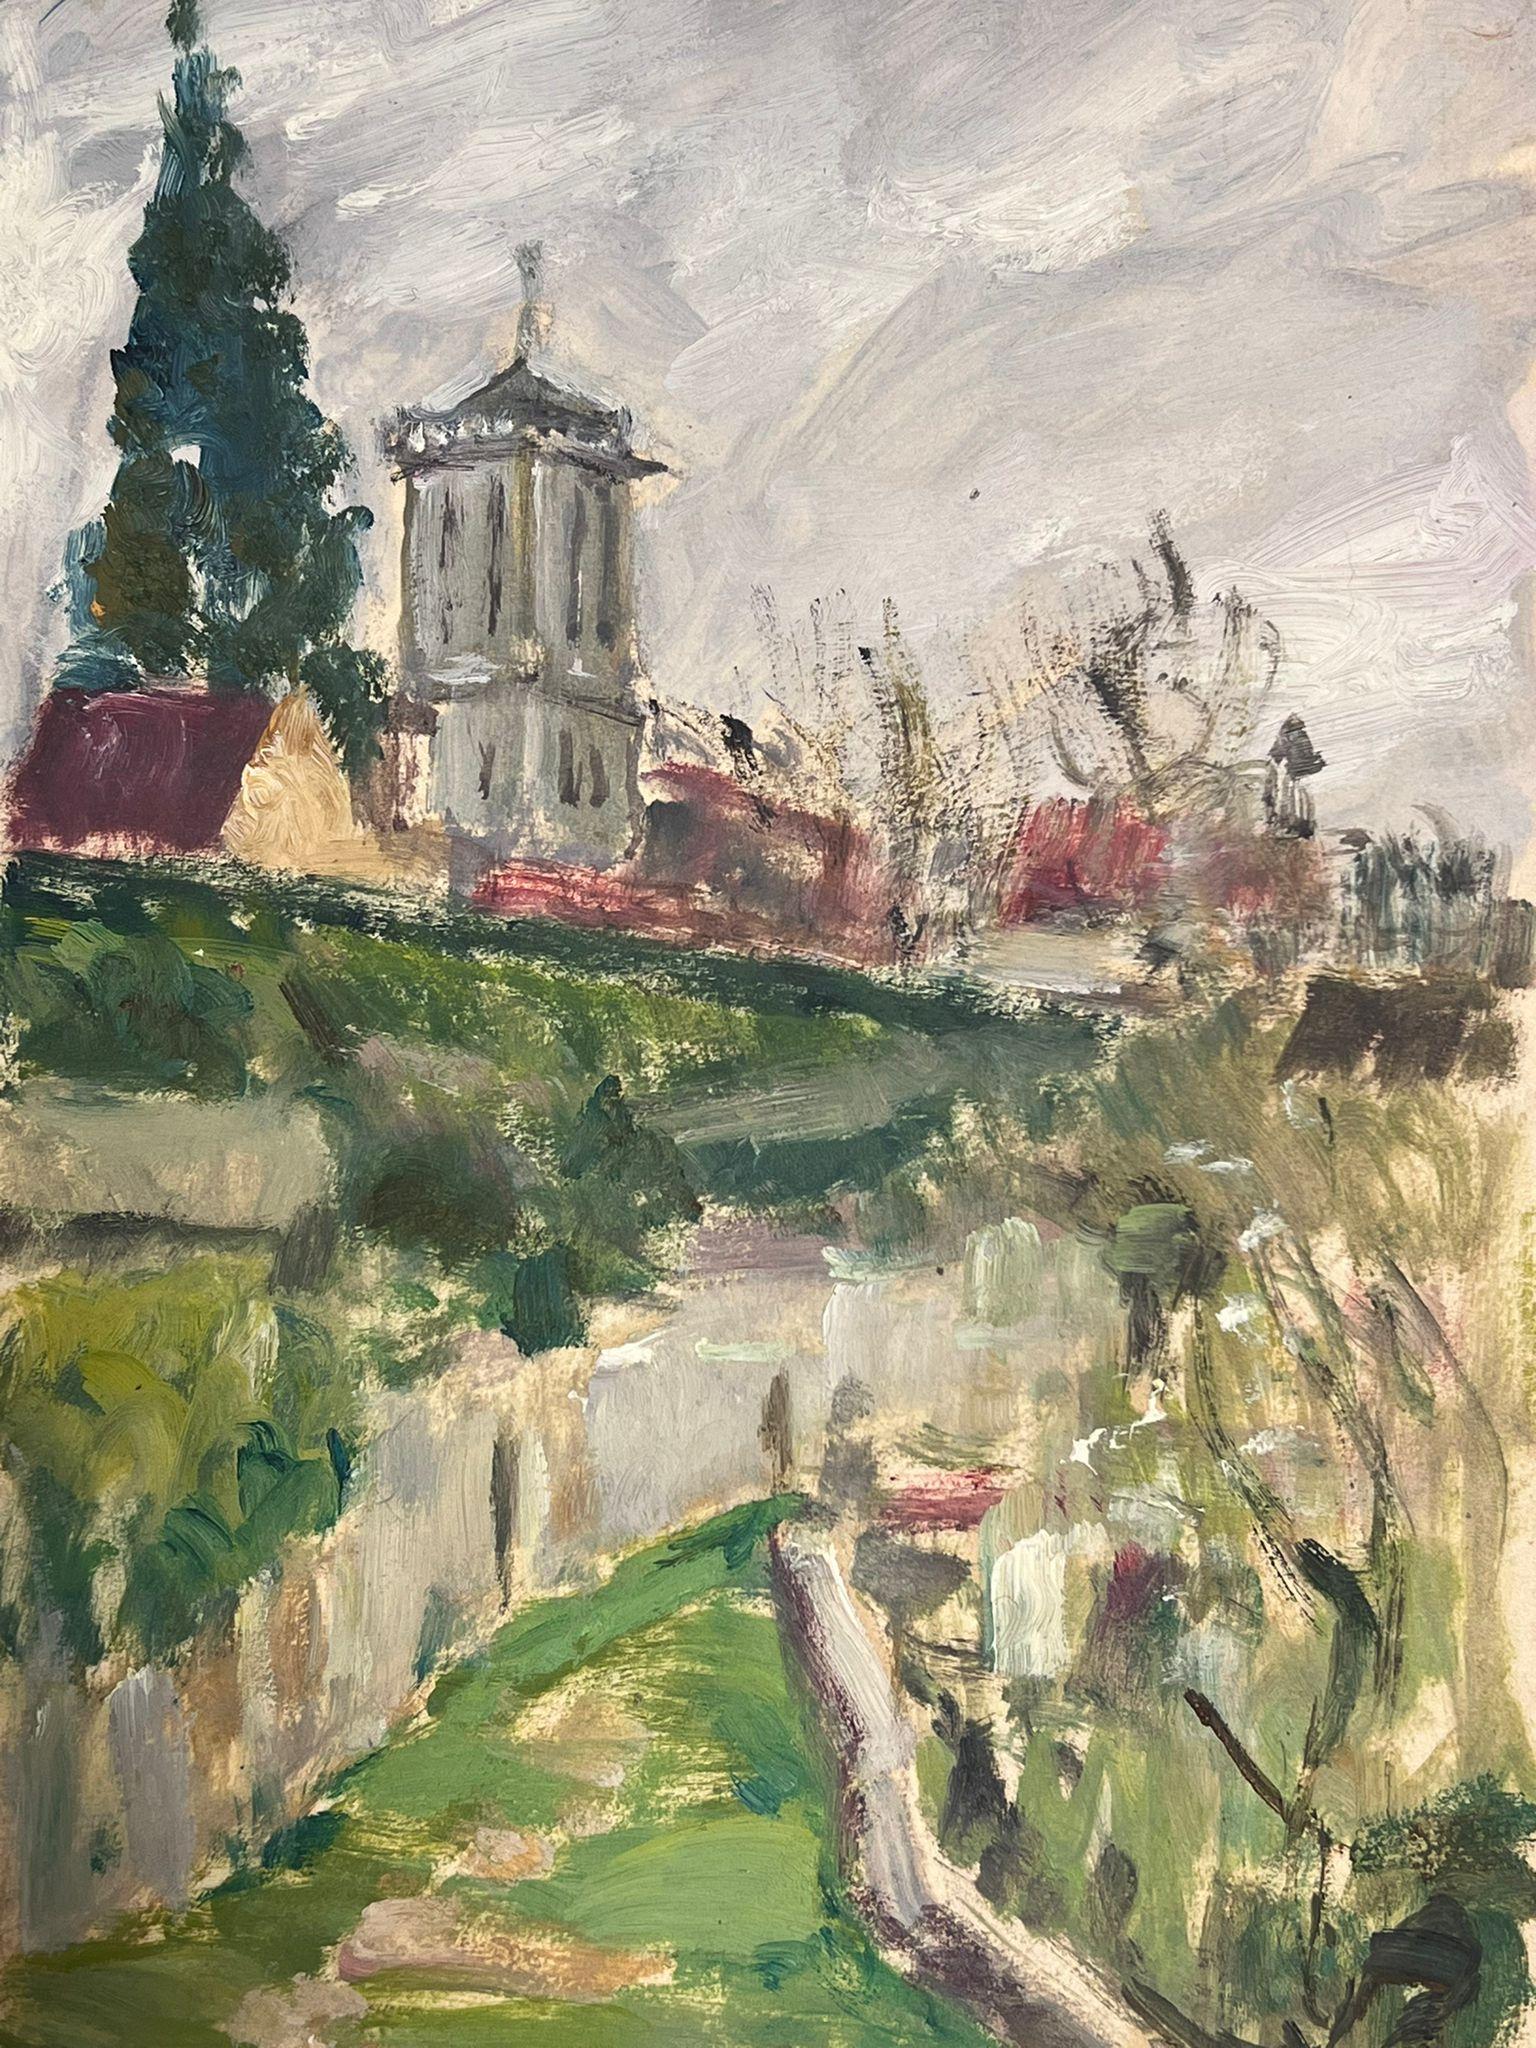 French Landscape
by Louise Alix, French 1950's Impressionist 
gouache on artist paper, unframed
painting: 10.5 x 7.25 inches
provenance: from a large private collection of this artists work in Northern France
condition: original, good and sound